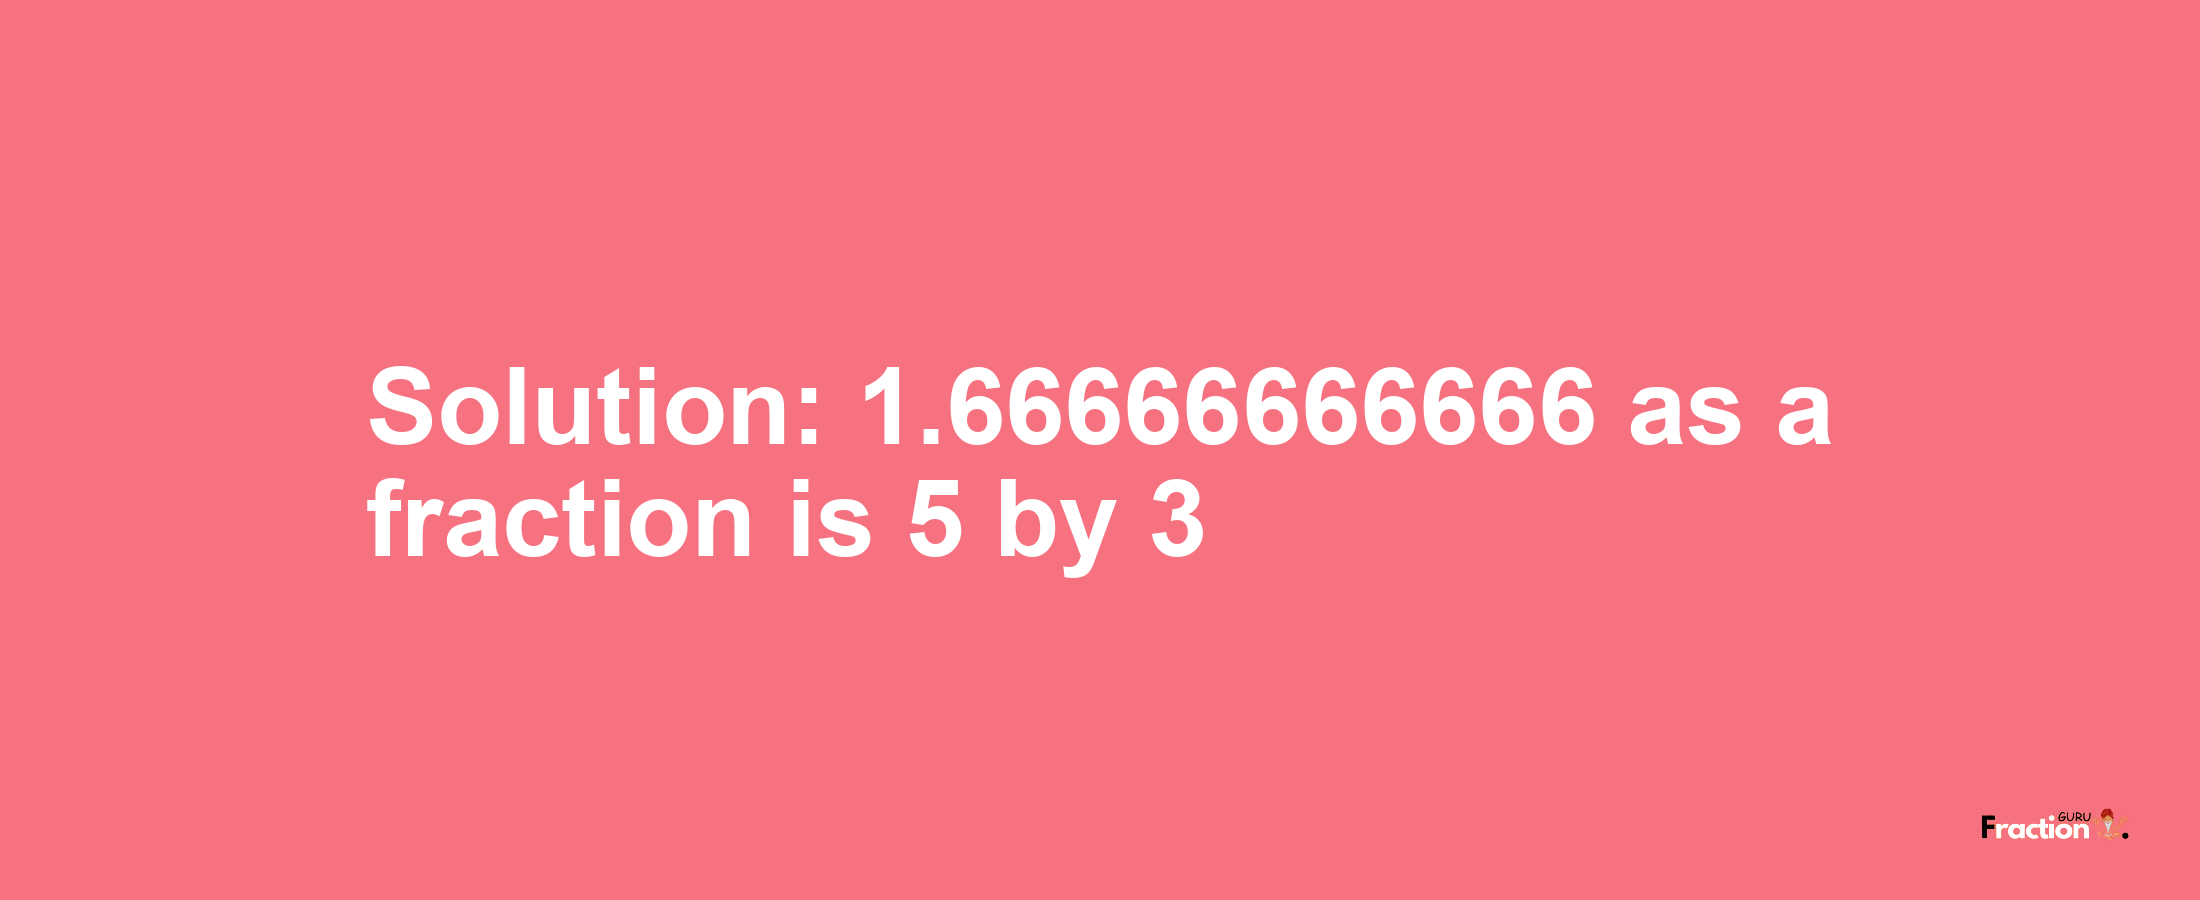 Solution:1.66666666666 as a fraction is 5/3